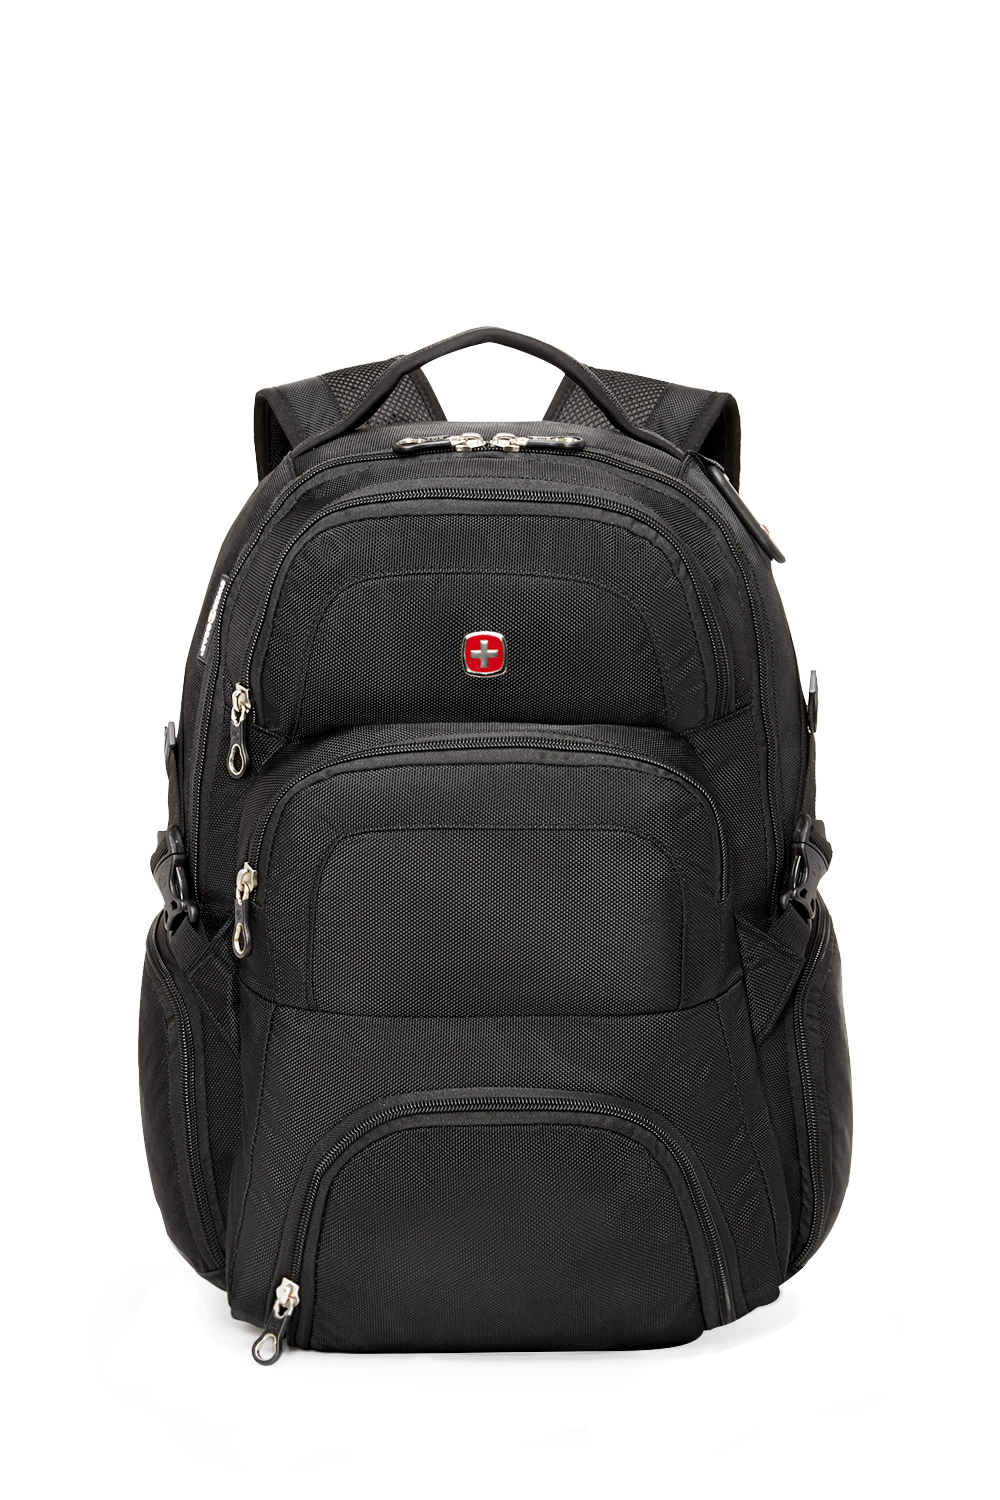 SWISSGEAR CANADA | Backpacks & Bags for Business, Laptop backpacks